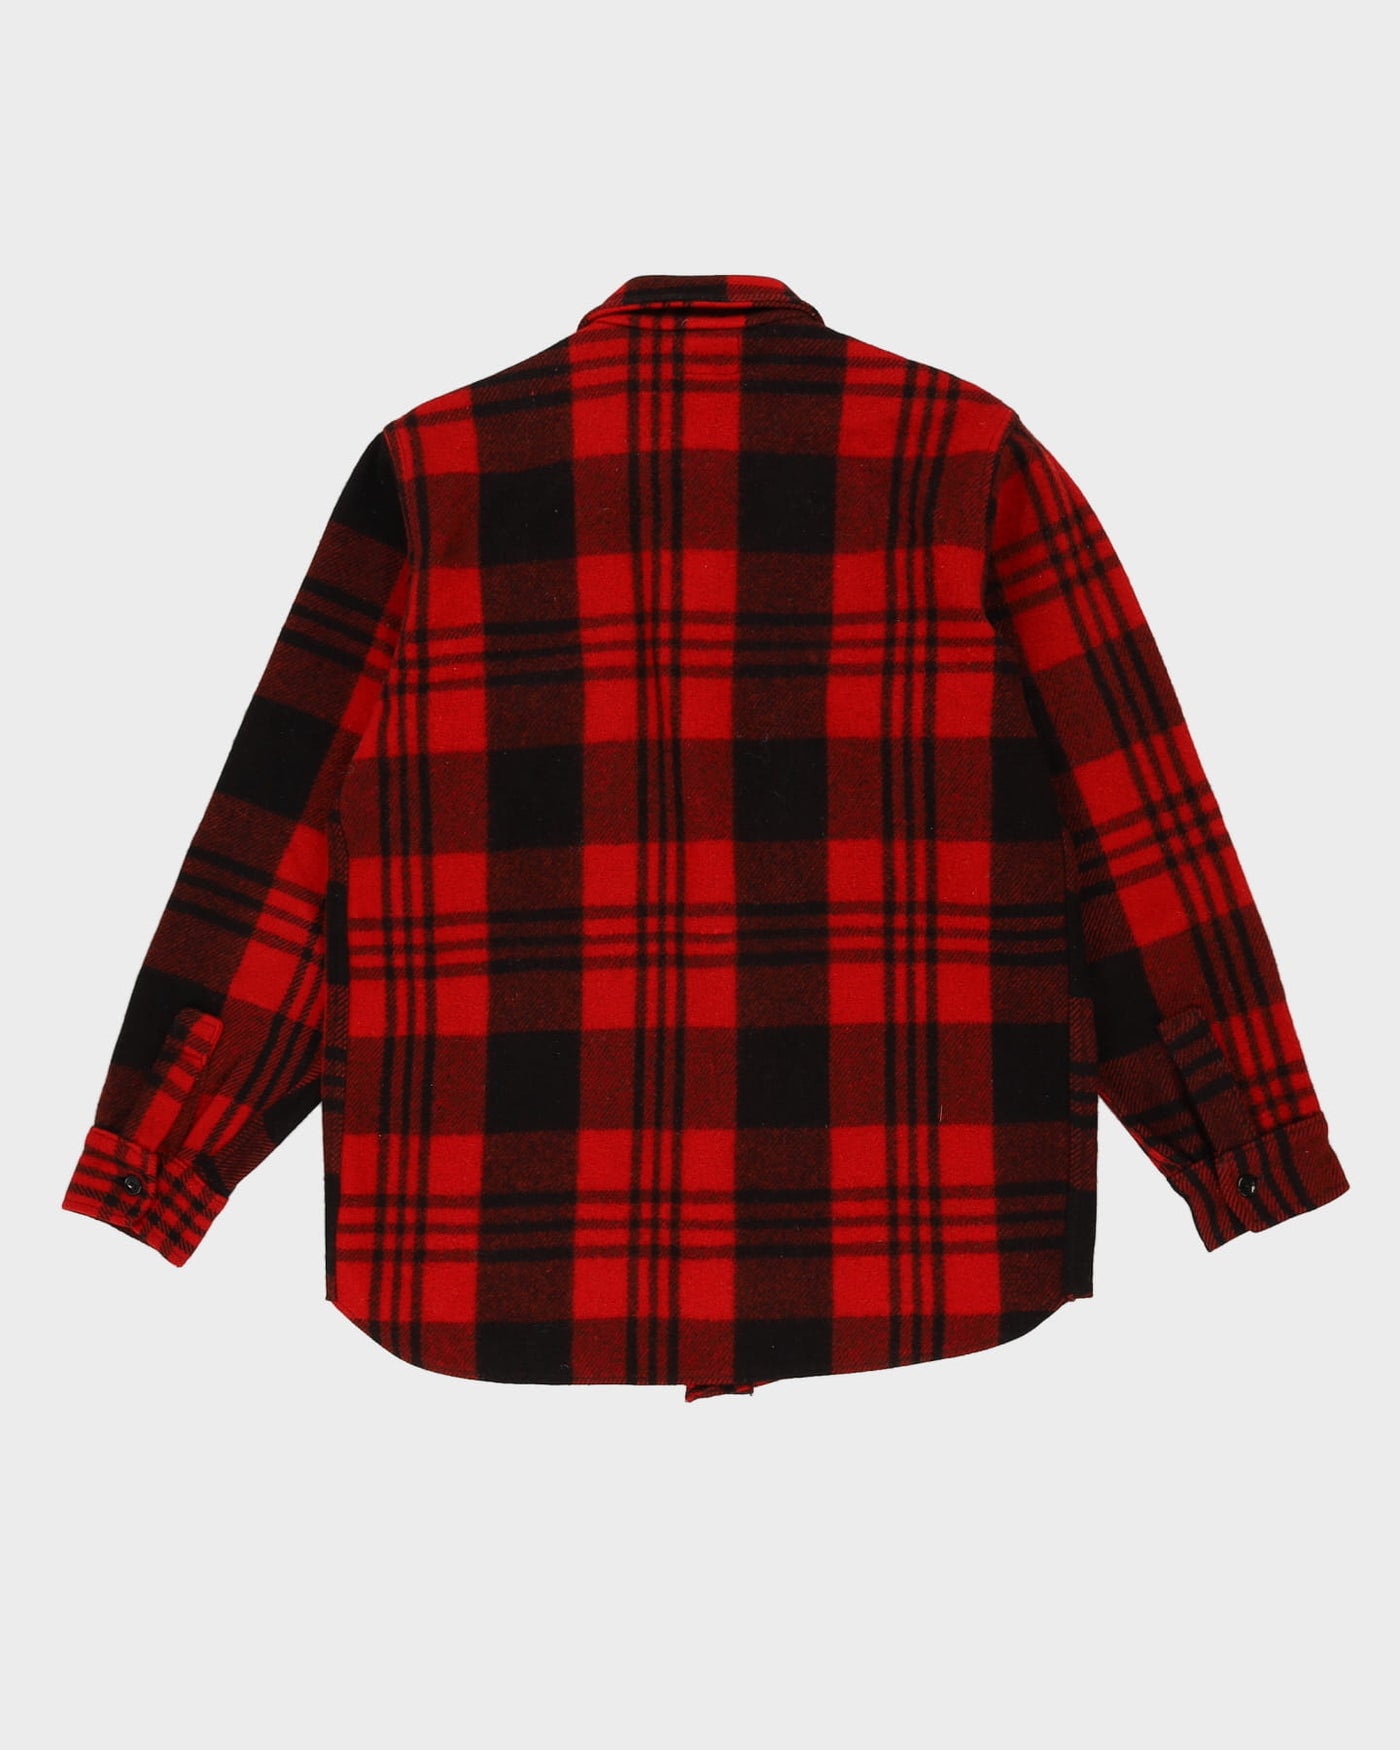 Vintage 70s Red Check Patterned Heavyweight Shirt / Jacket - L